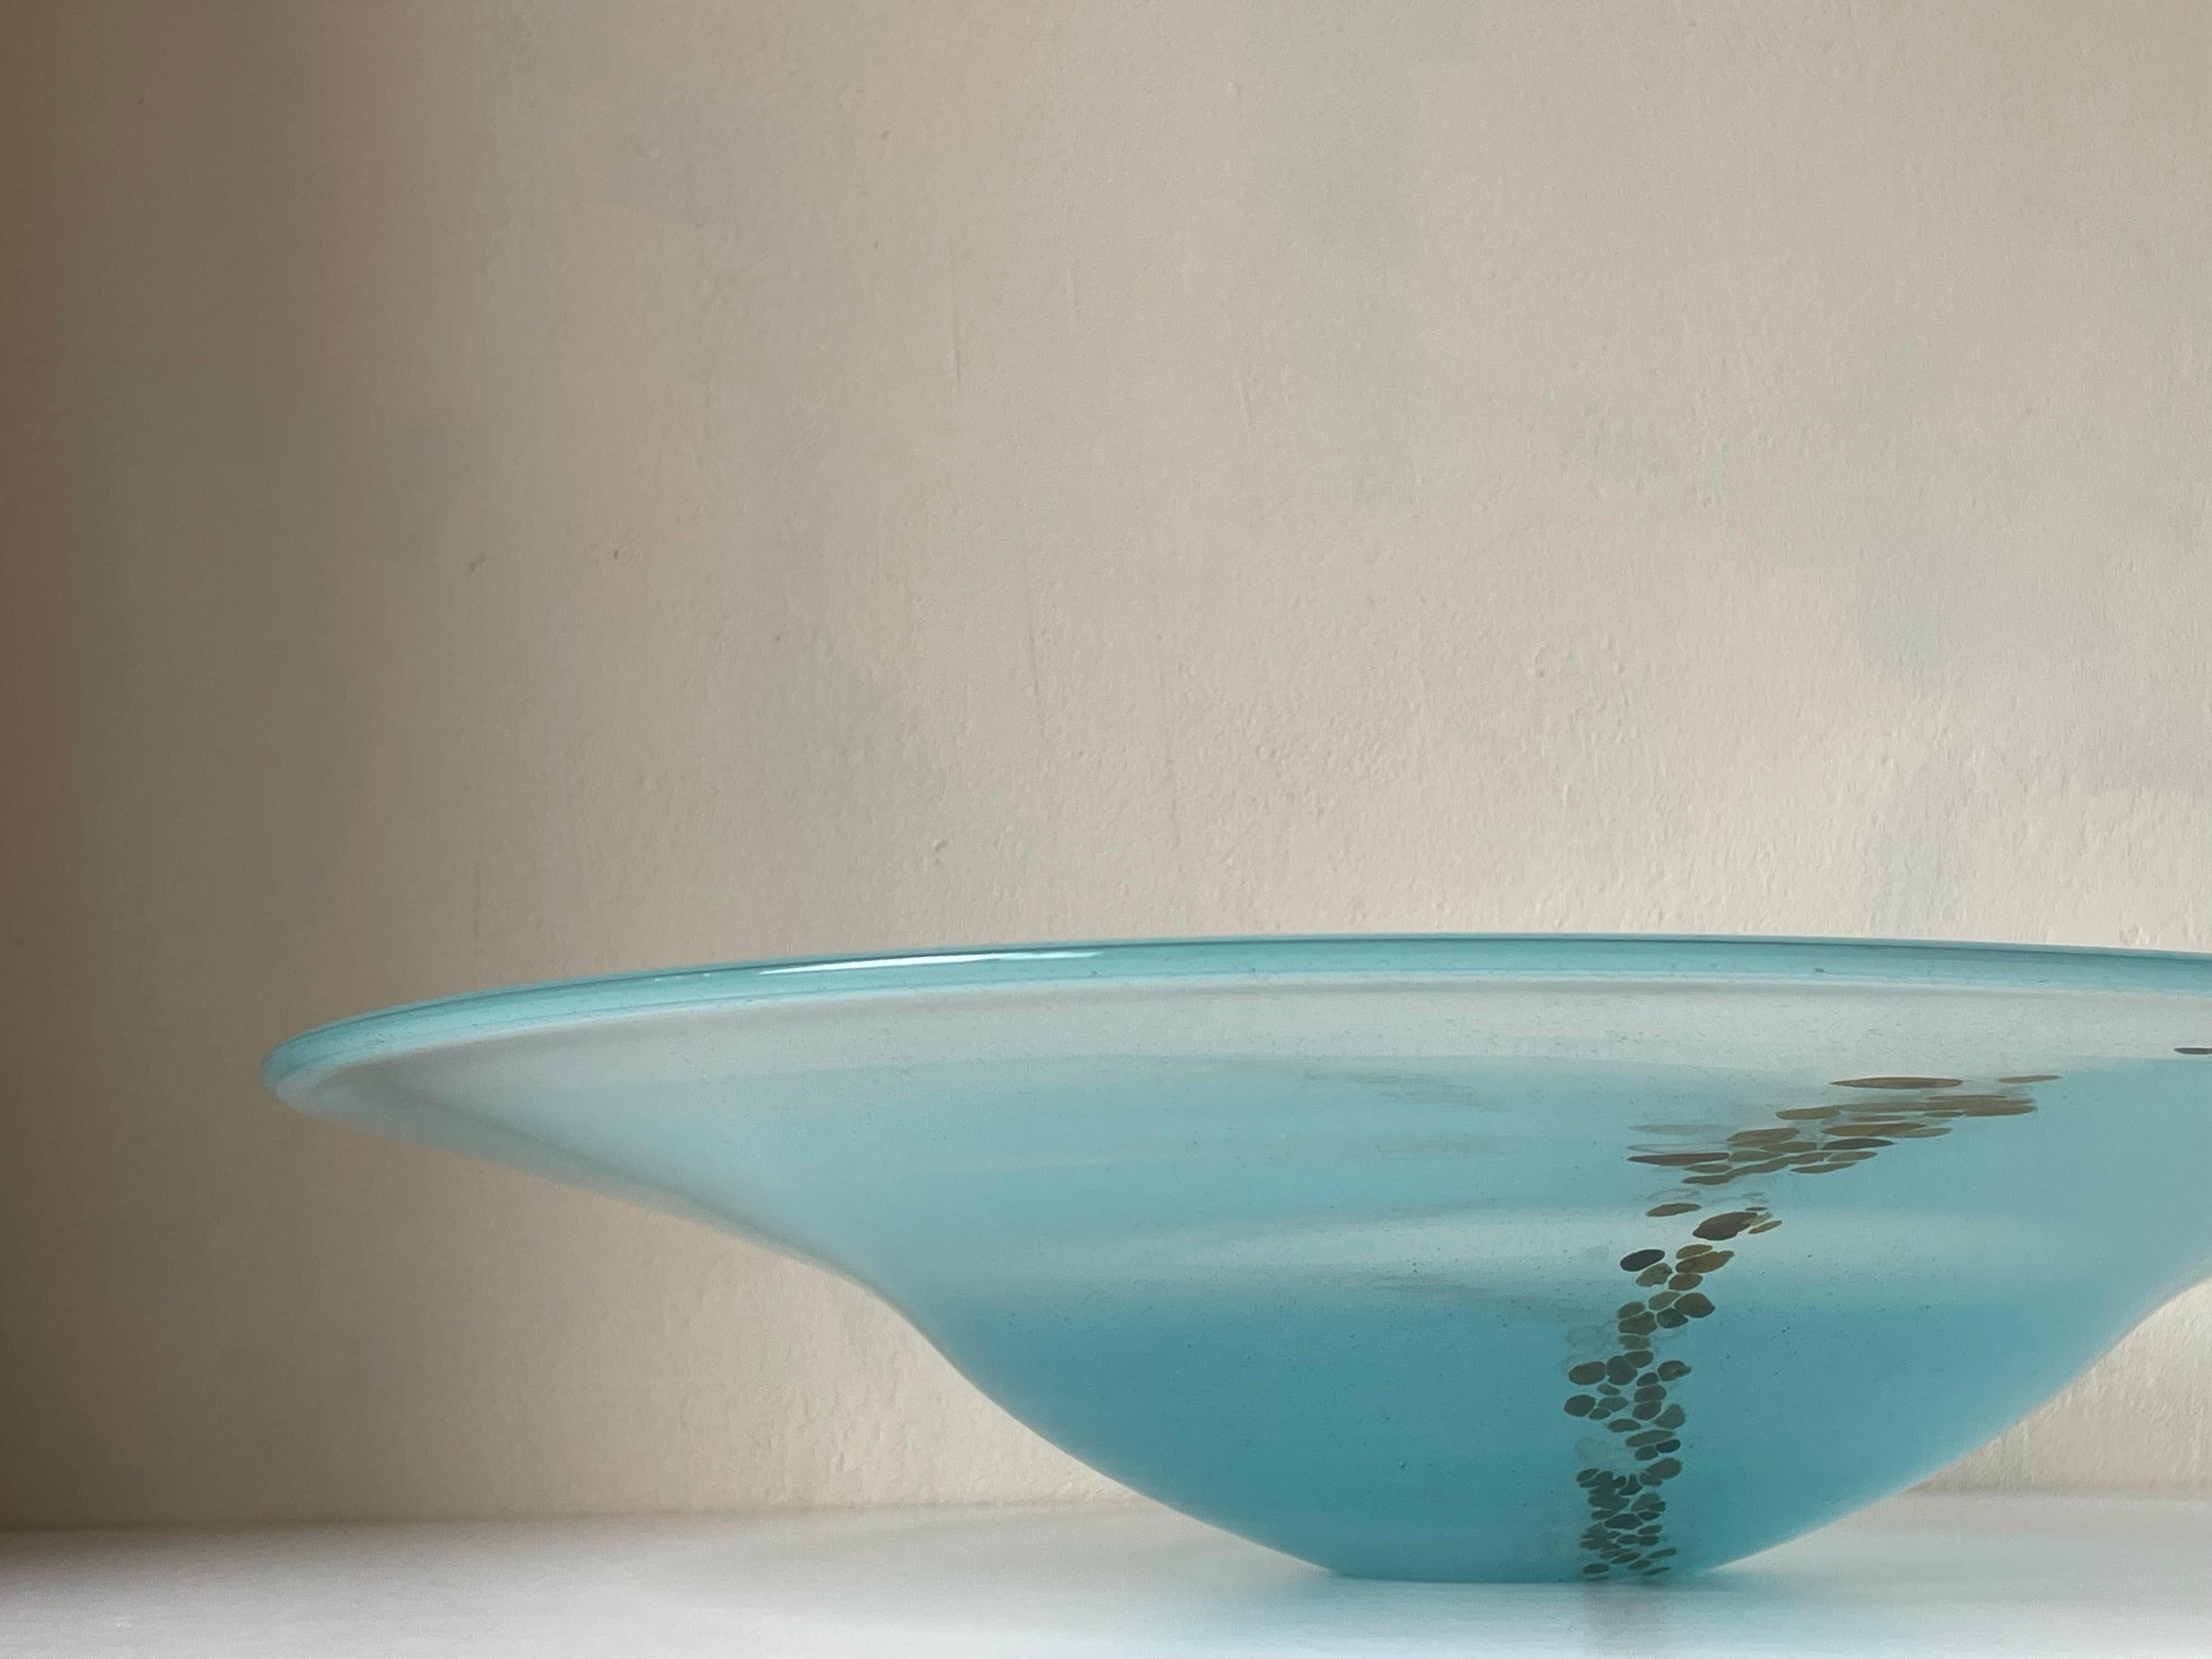 Wide translucent light blue mouth blown art glass centerpiece bowl for decoration or serveware. Organic blue, white and caramel colored bubble decor from one side to the other resembling an underwater scenery or pebbles on a beach. Beautiful vintage